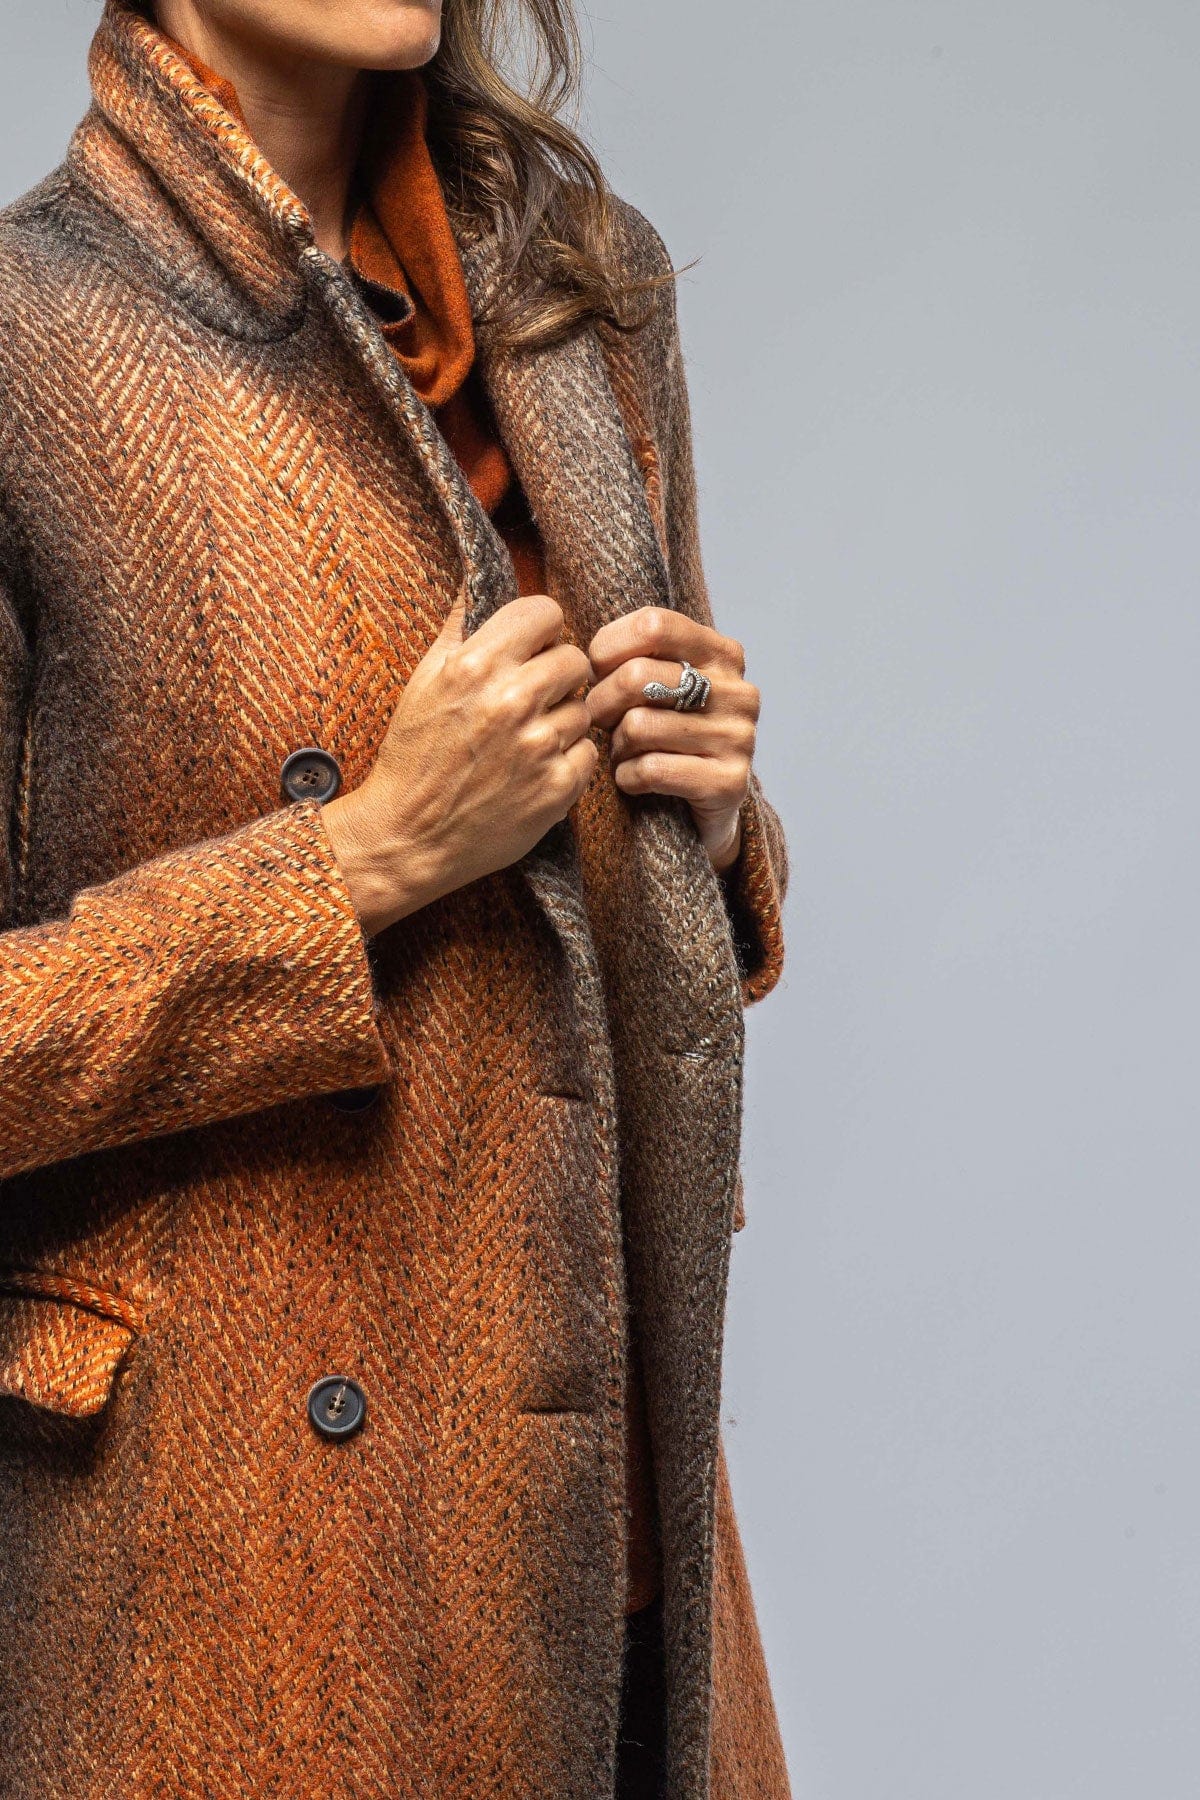 Camilla Long Dbl Brstd Coat In Rust/Charcoal - AXEL'S